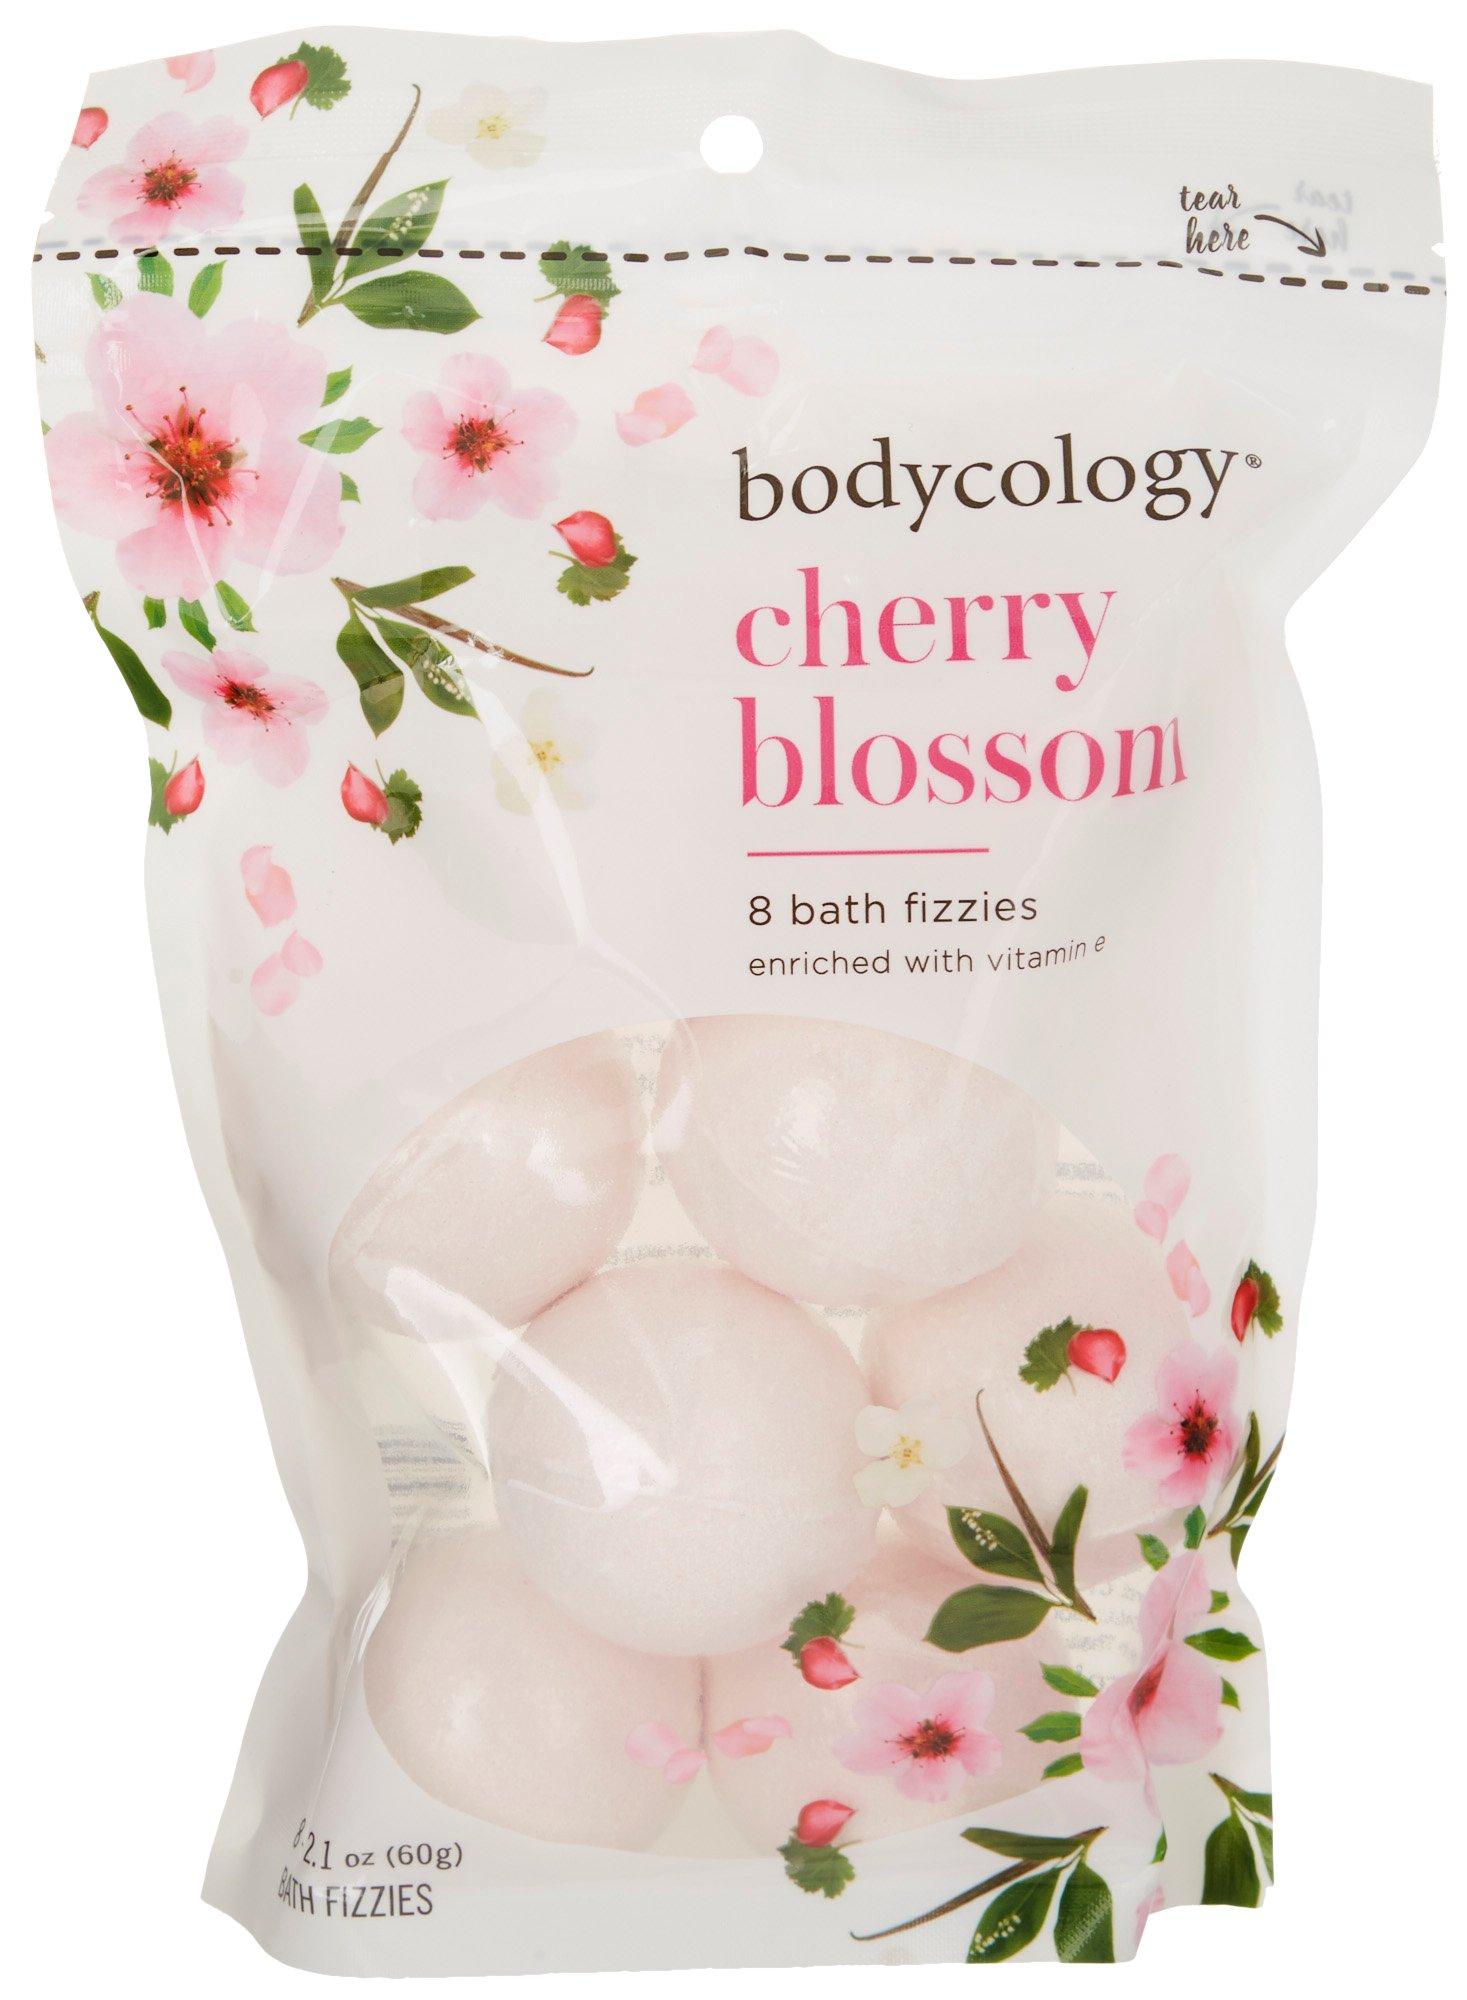 Bodycology Cherry Blossom Bath Fizzies 8 ct.